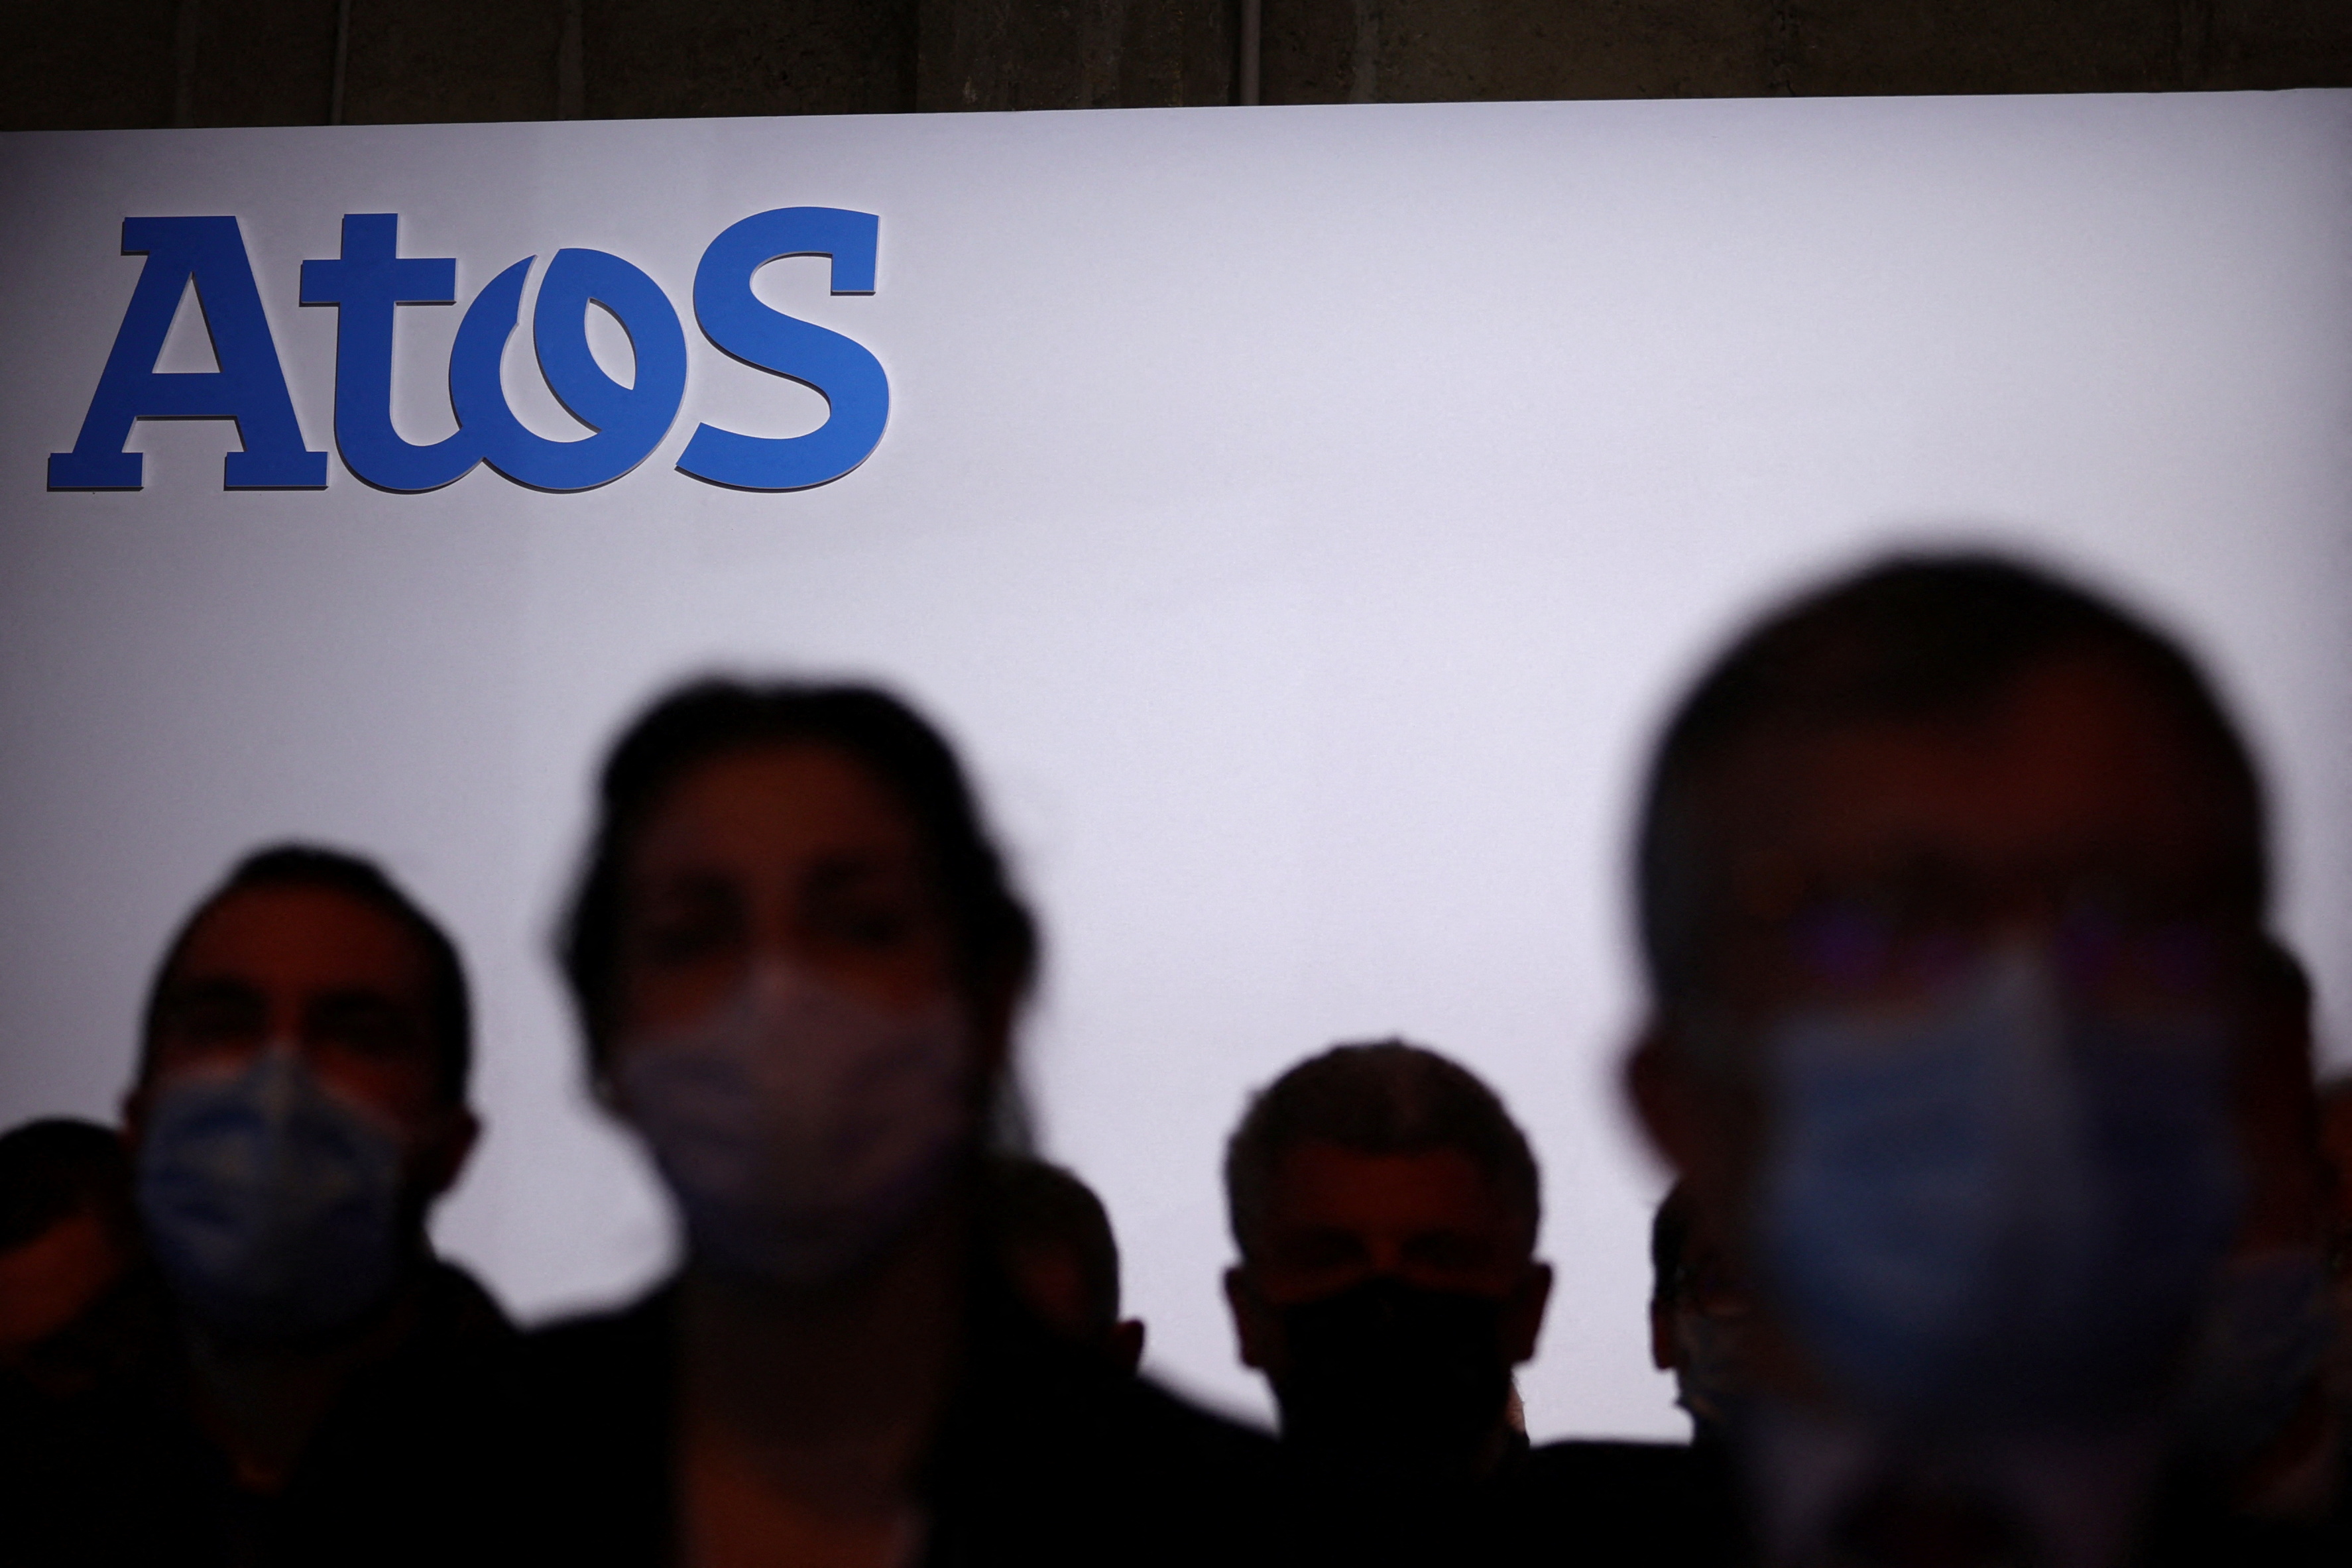 French IT consulting firm Atos presents its new supercomputer in Paris